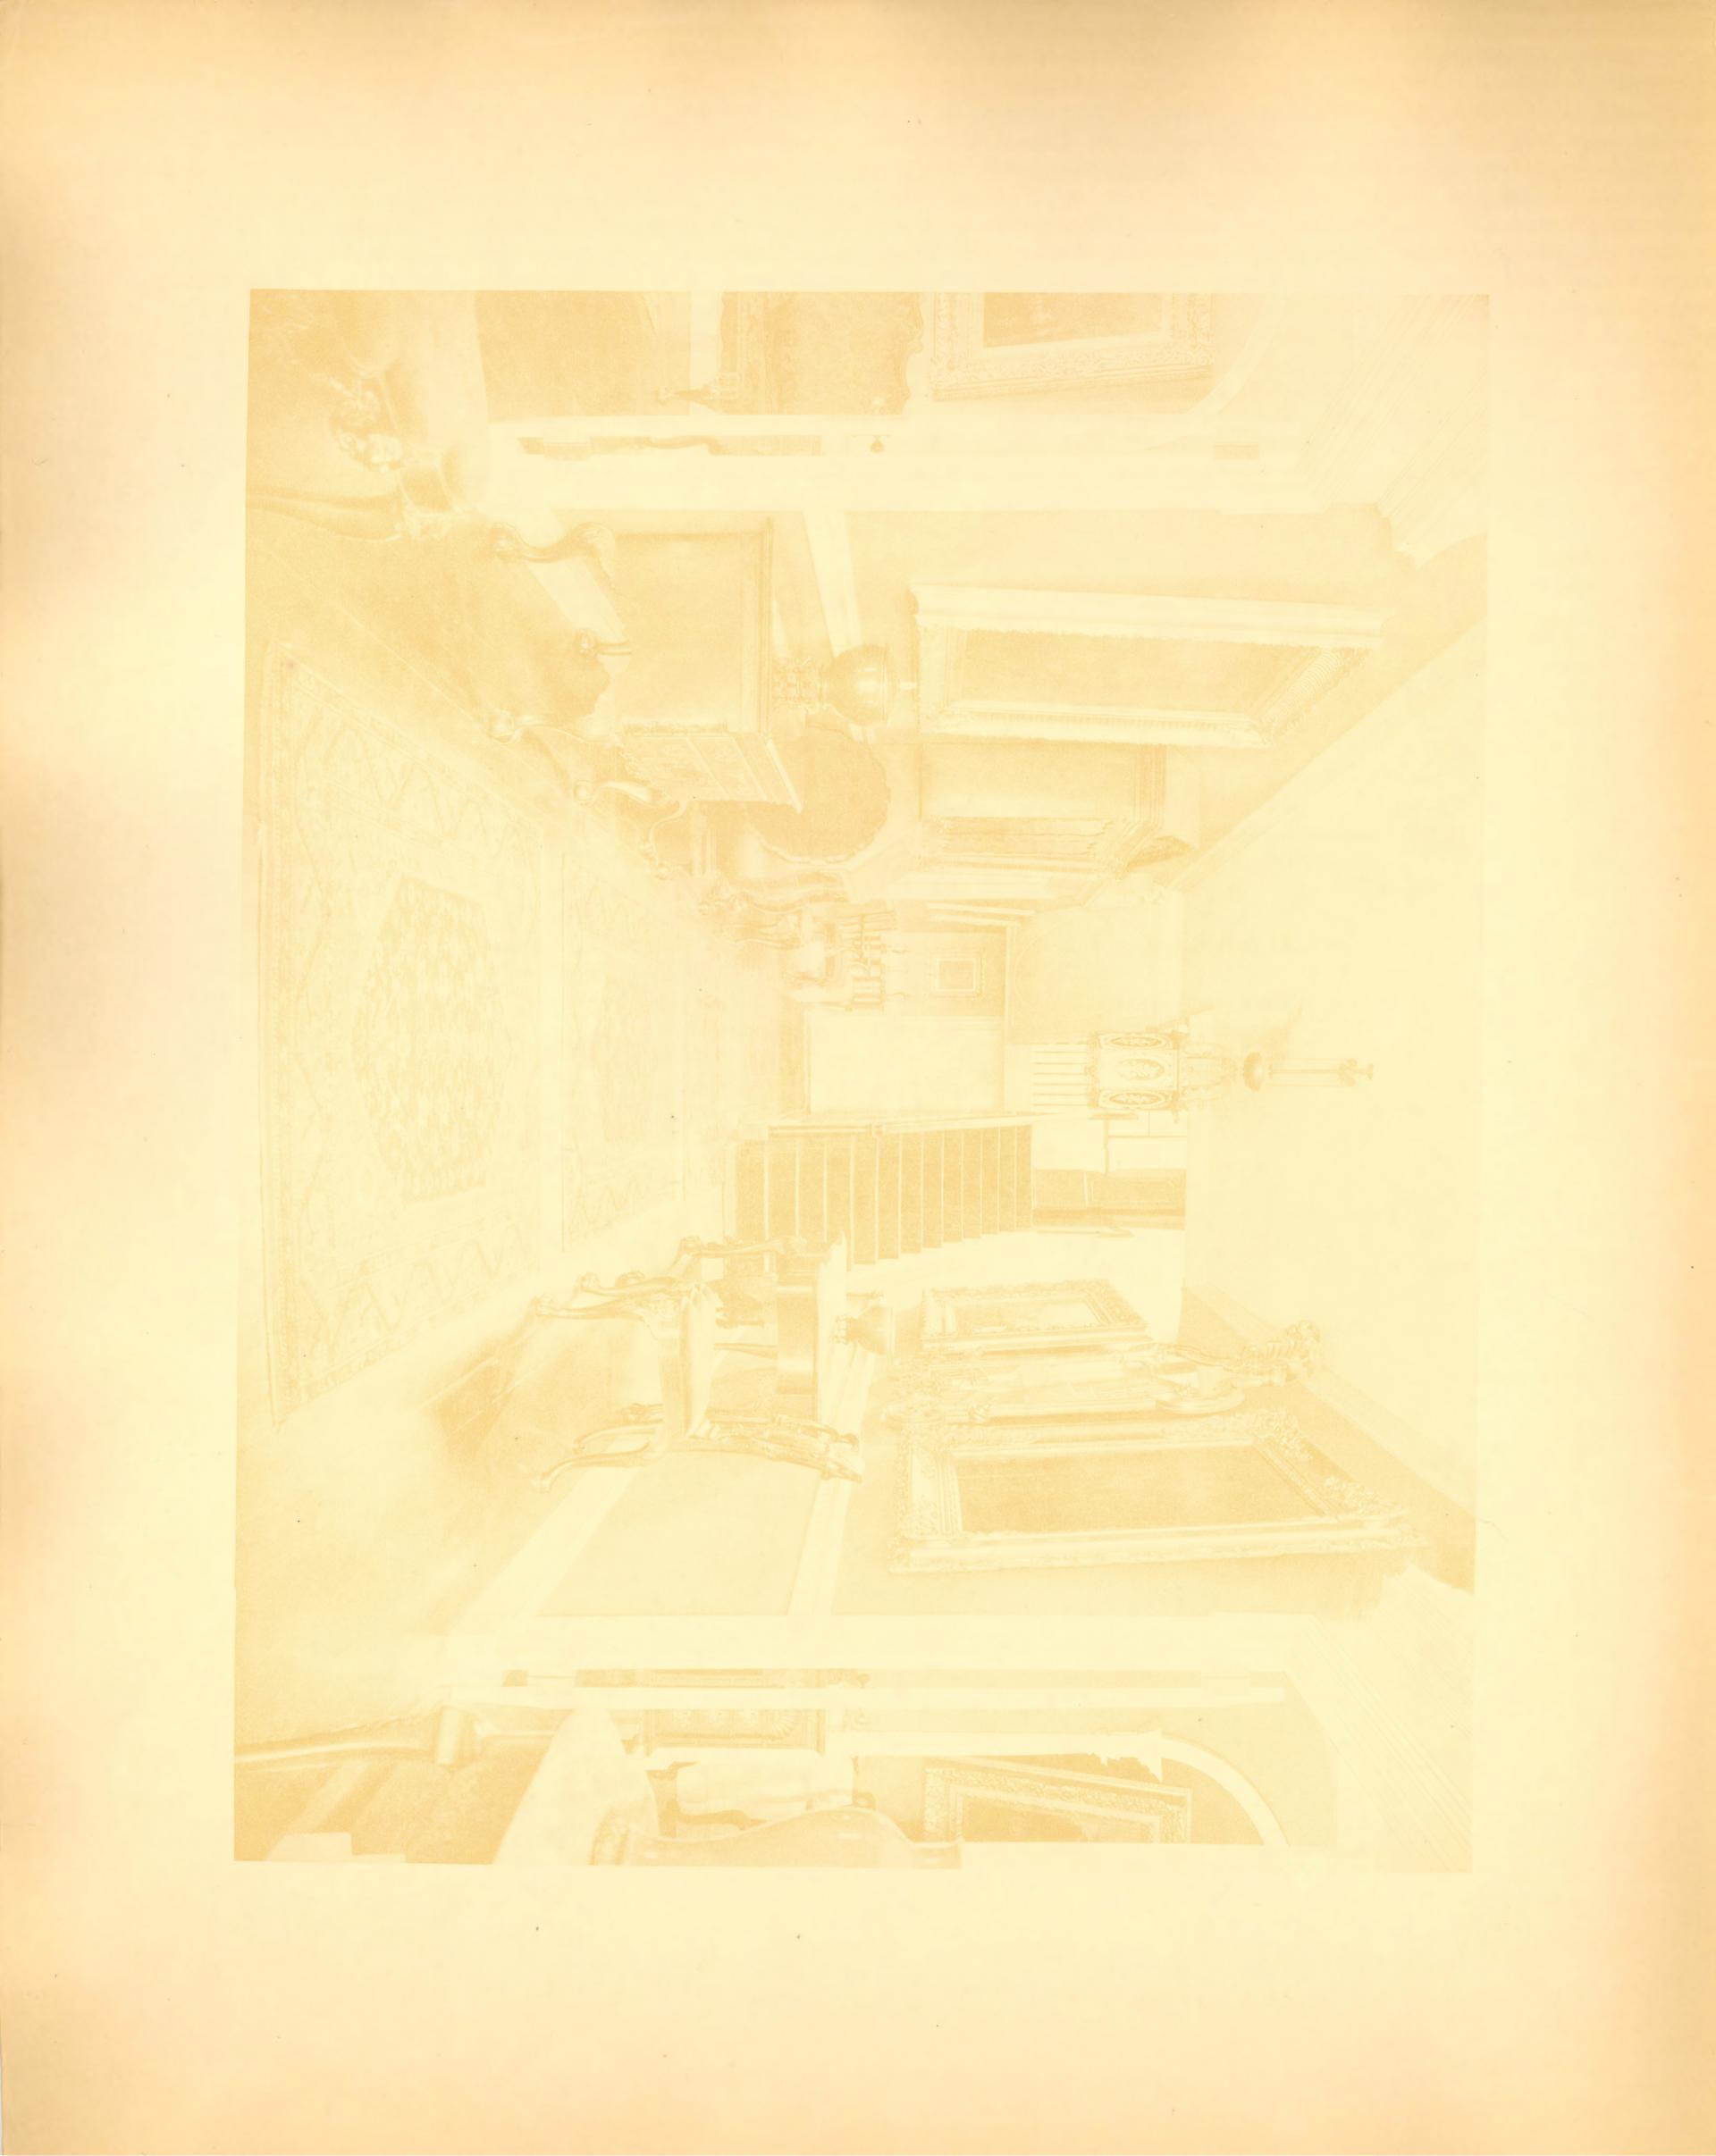 Pendleton Collection Catalog Blank Page: faint offset image, photograph of the entryway to the Pendelton House, filled with early American furniture